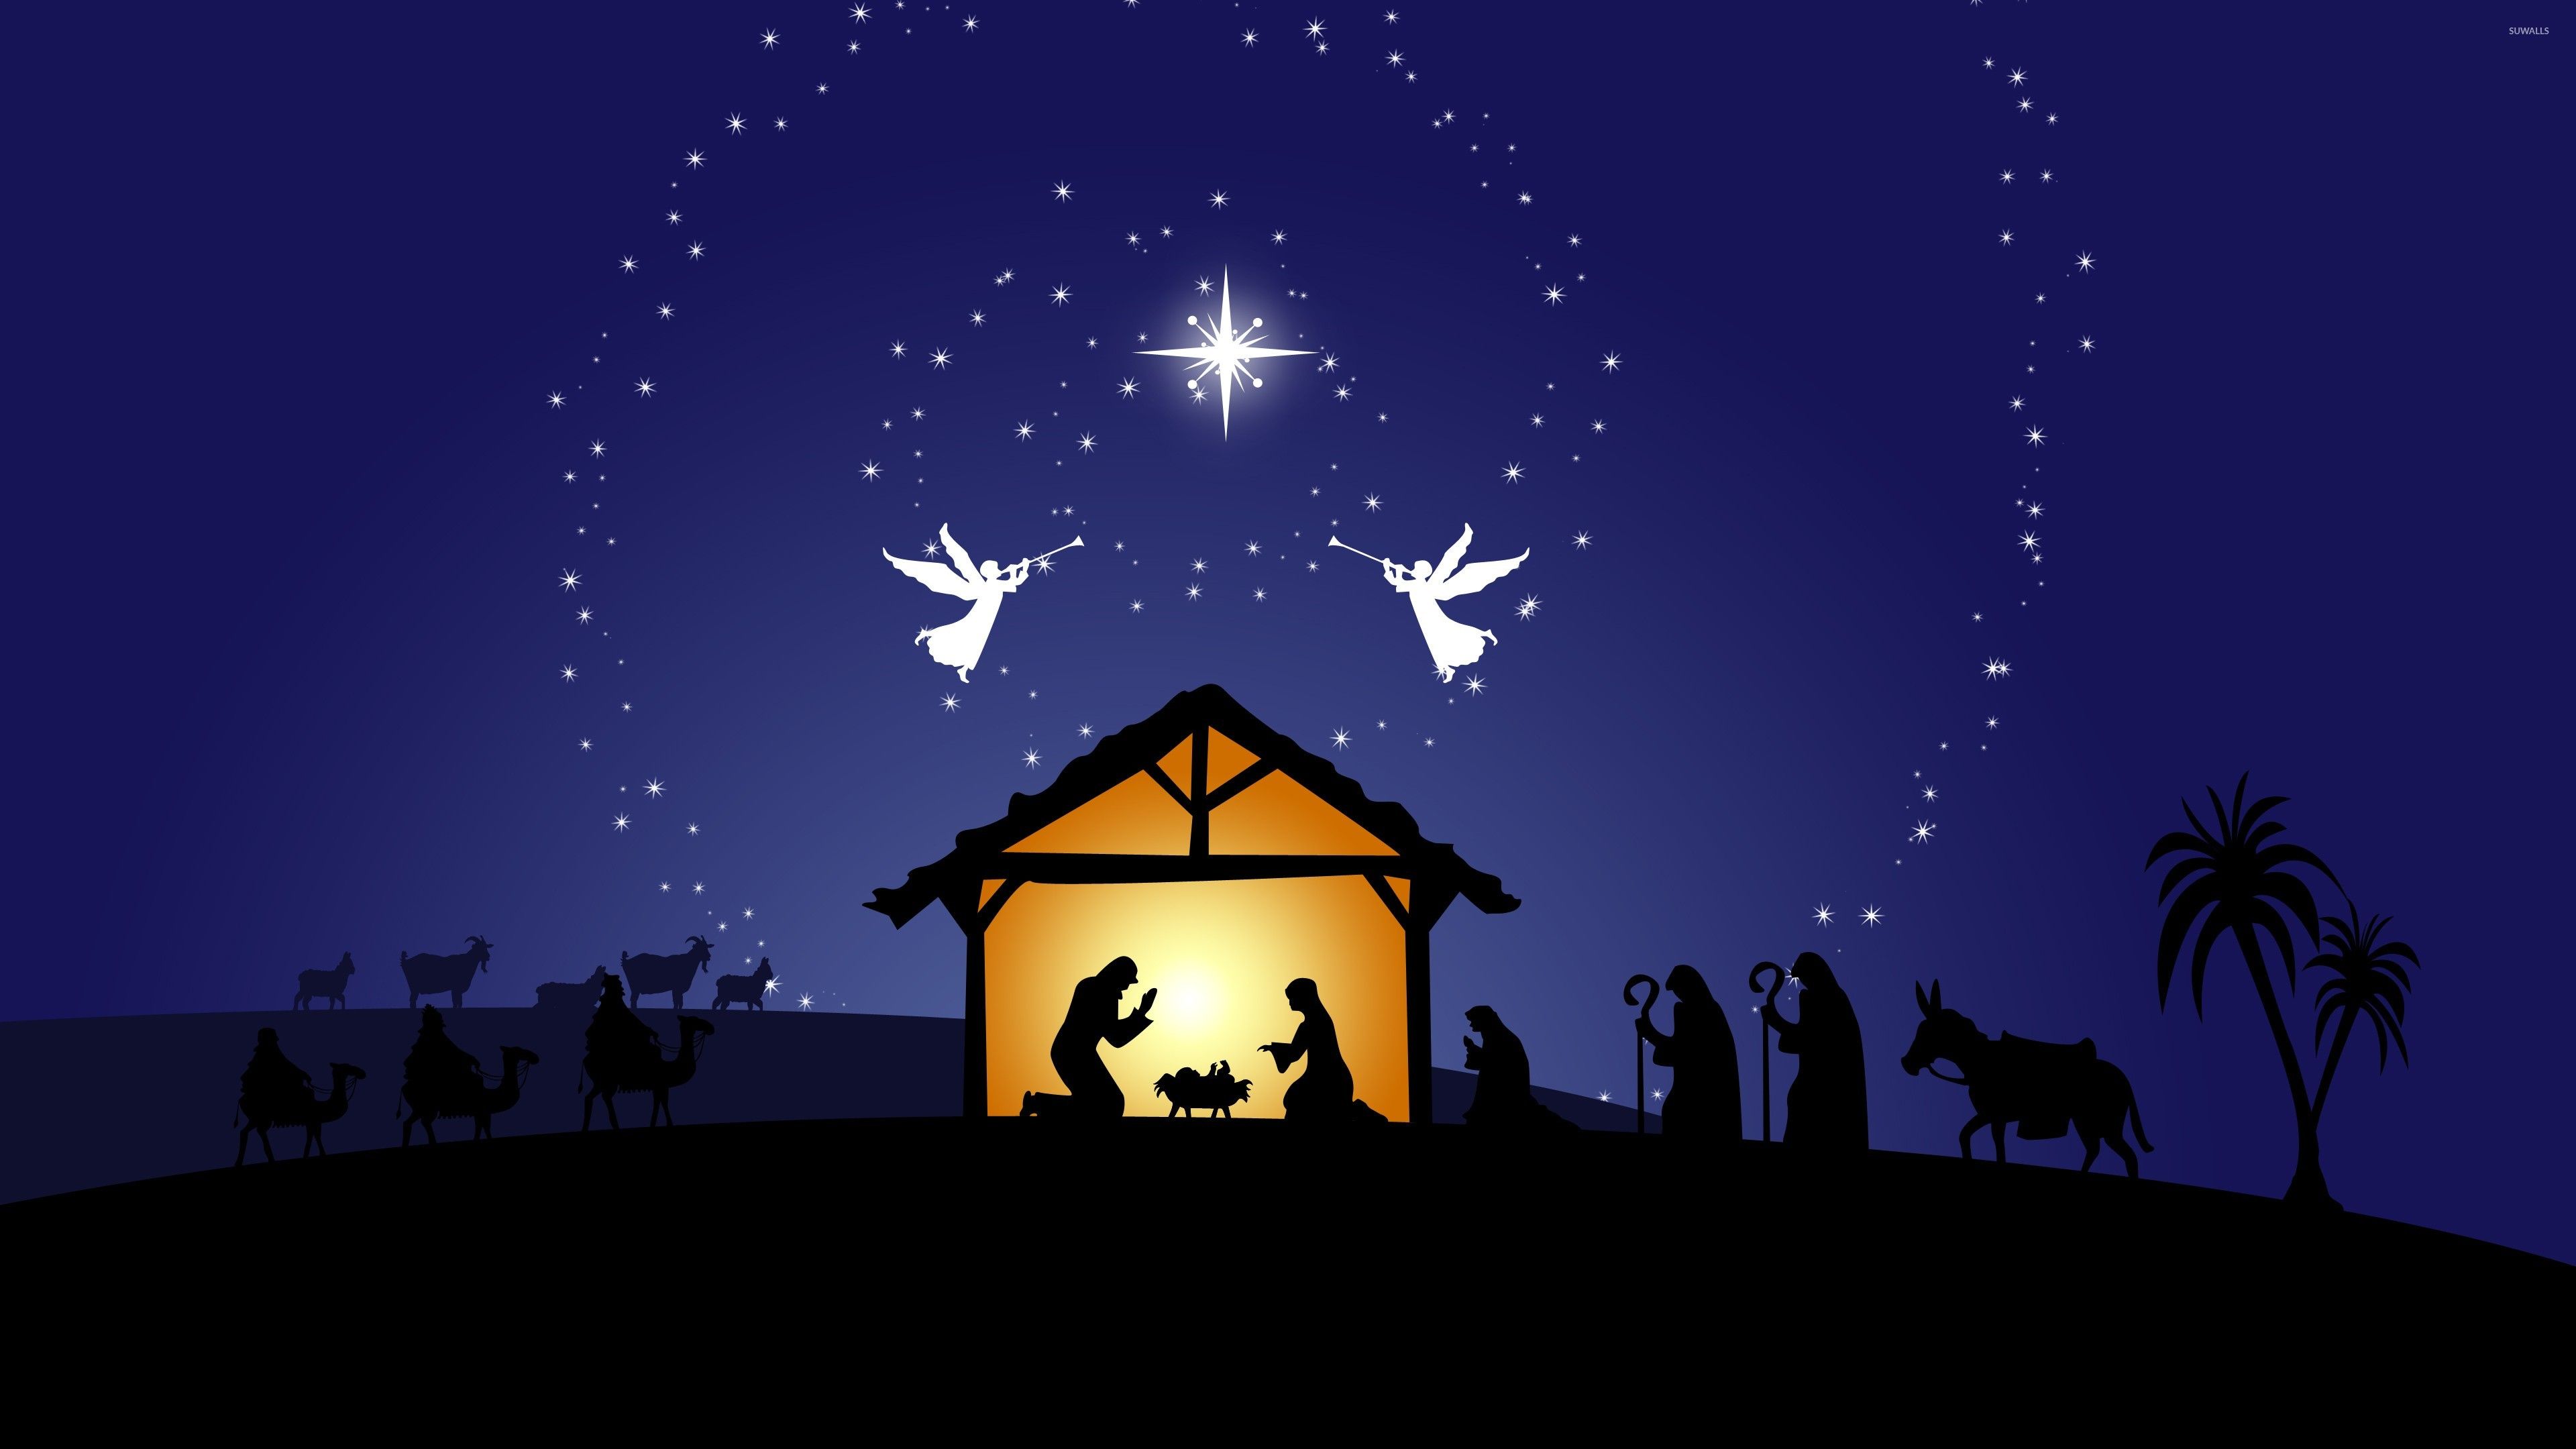 Fresh Christmas Wallpaper Nativity Scene. Best Christmas Quotes 2018, Funny & Inspirational Holiday Sayings